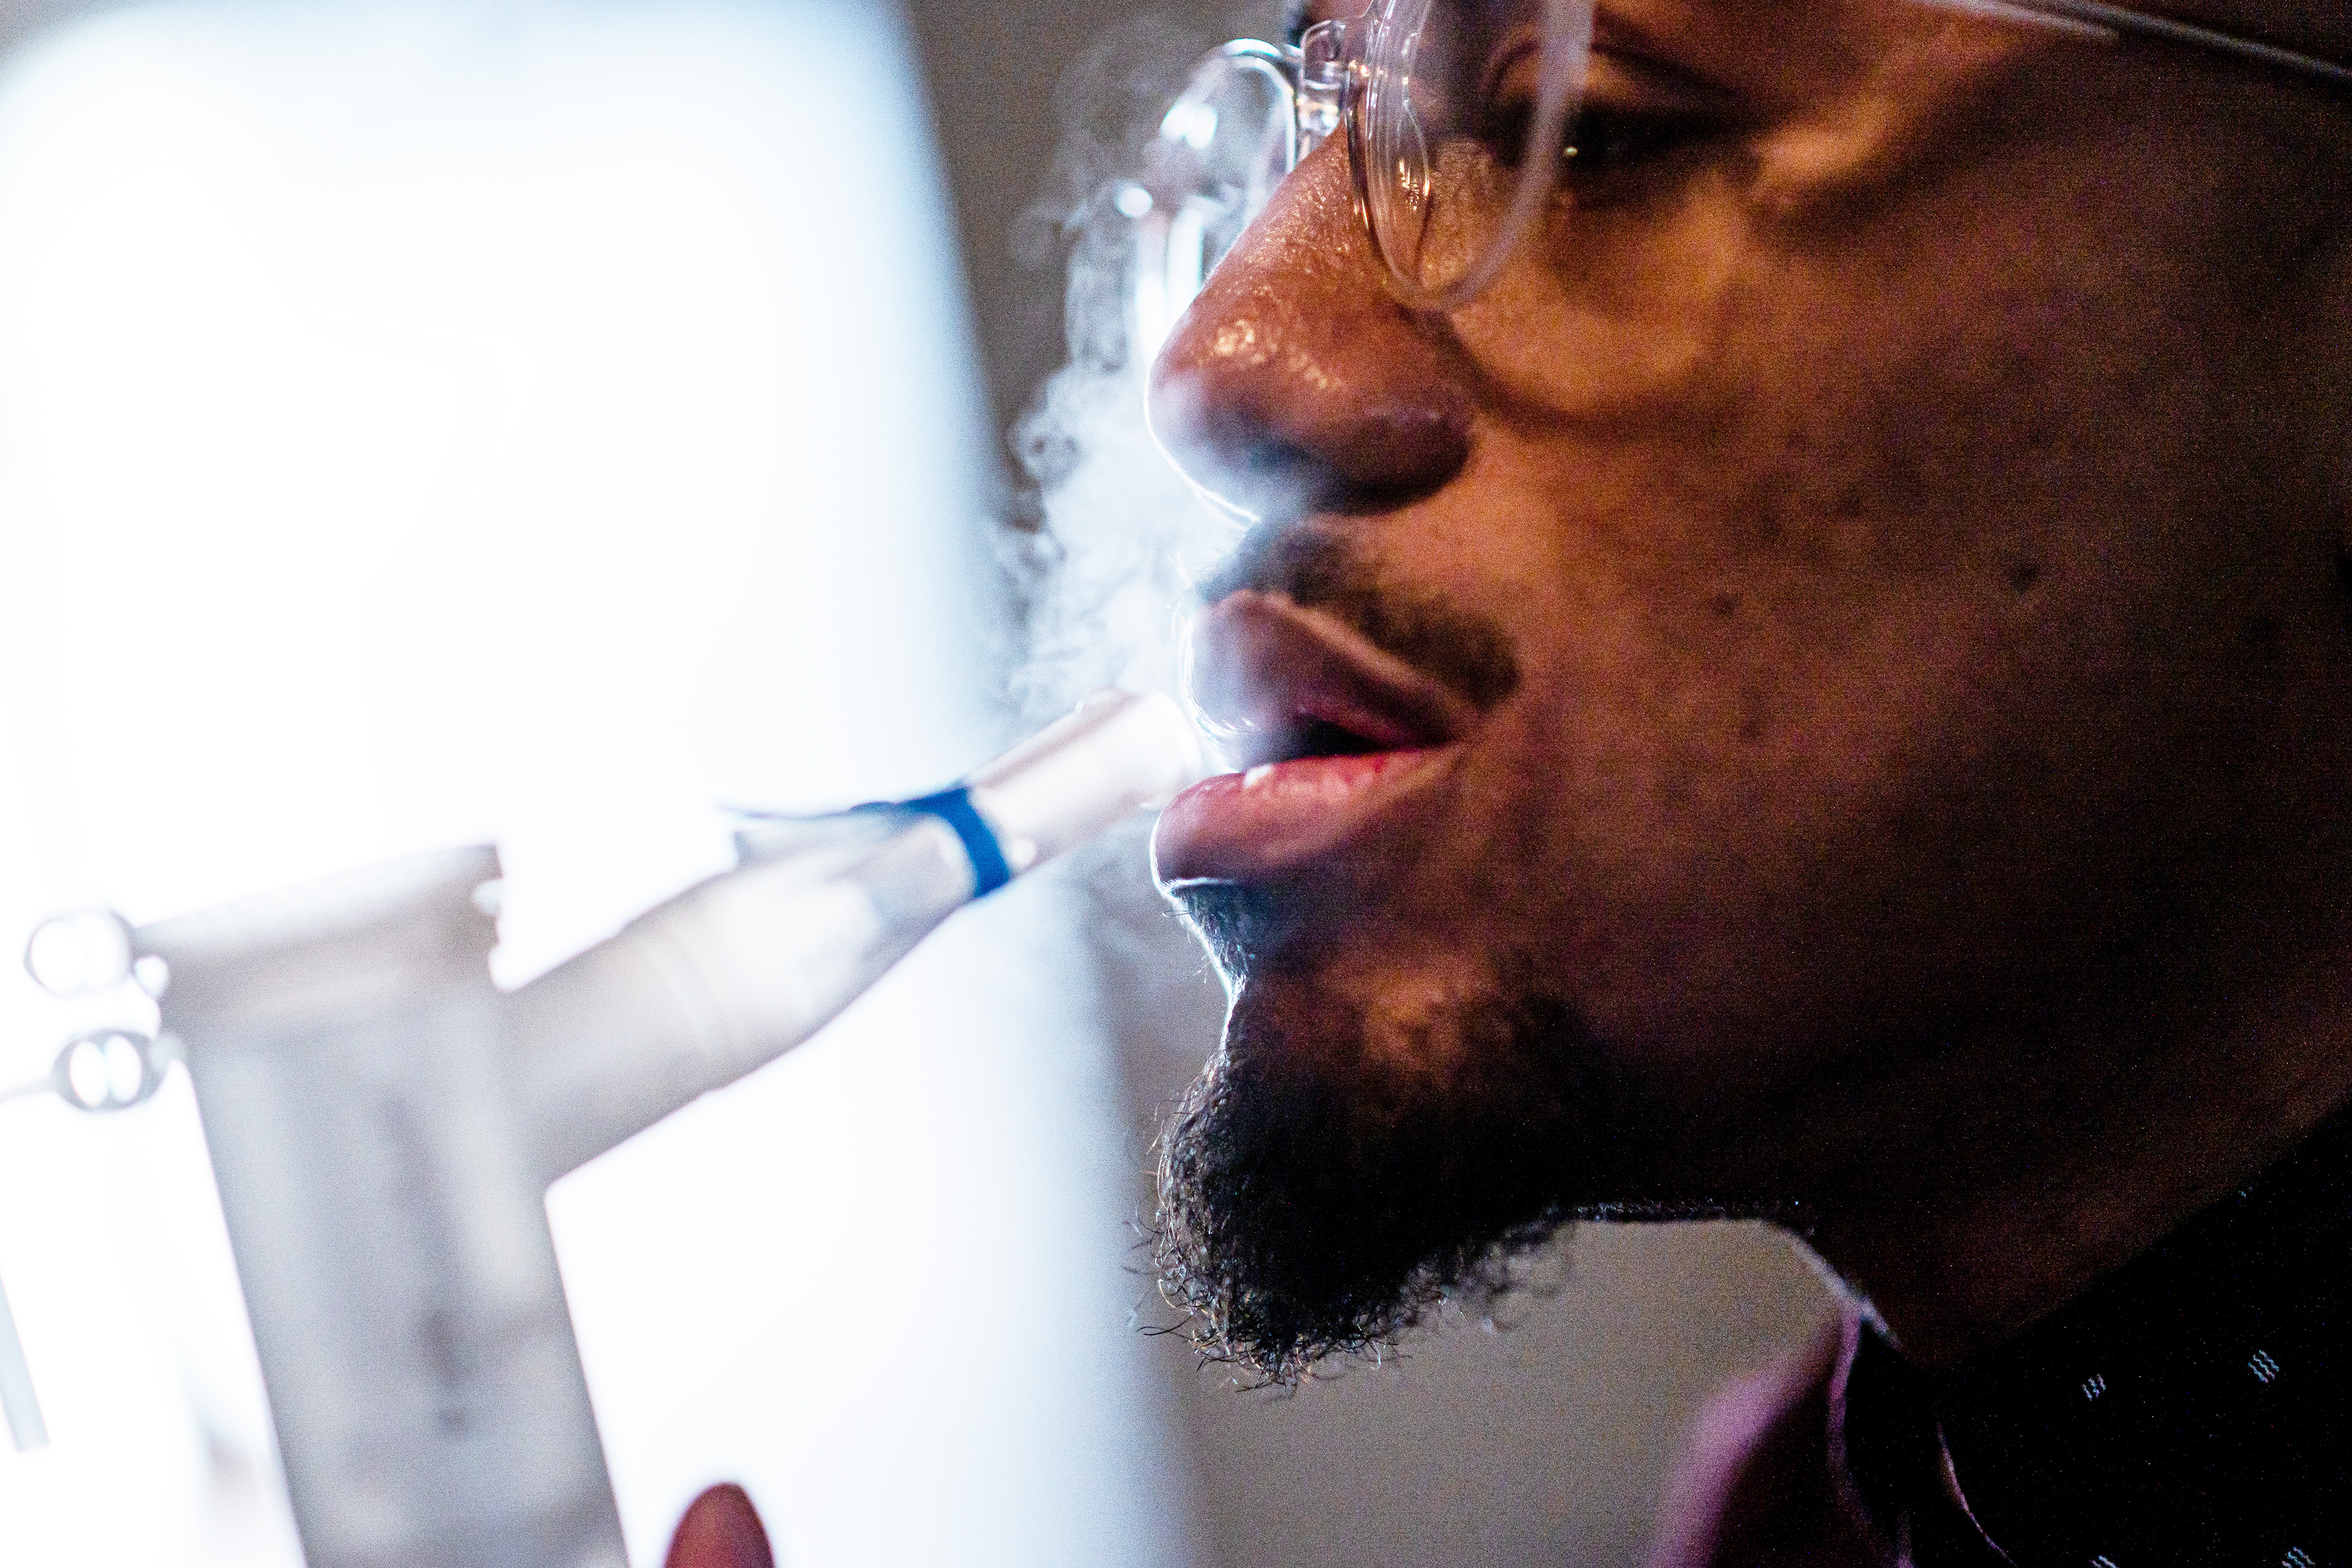 A nebulizer aerosolizes medication that Nicholas Kelly, seen in profile on the right, breathes in through a mouthpiece. A window is seen in the background, casting dramatic shadows.